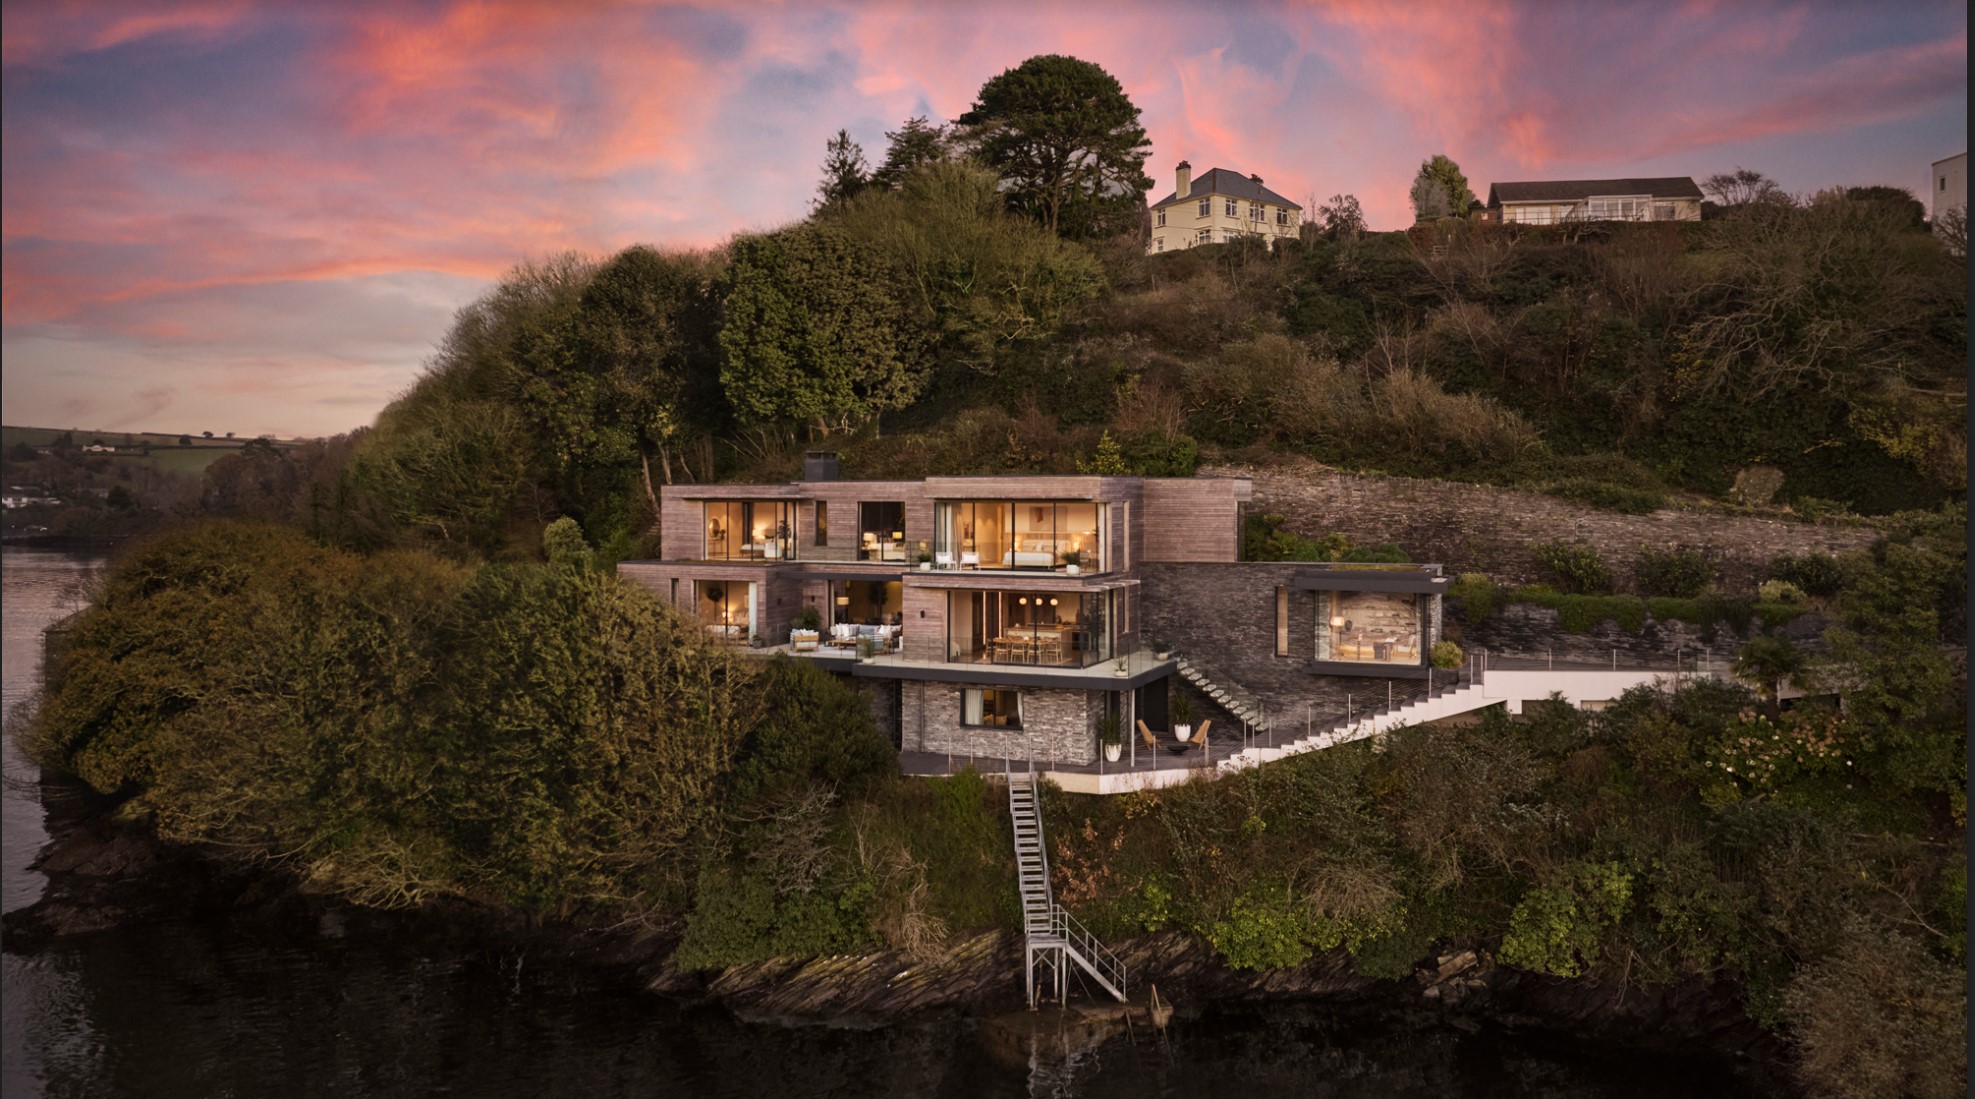 The grandmother had landed the £4.5million waterfront home in Cornwall